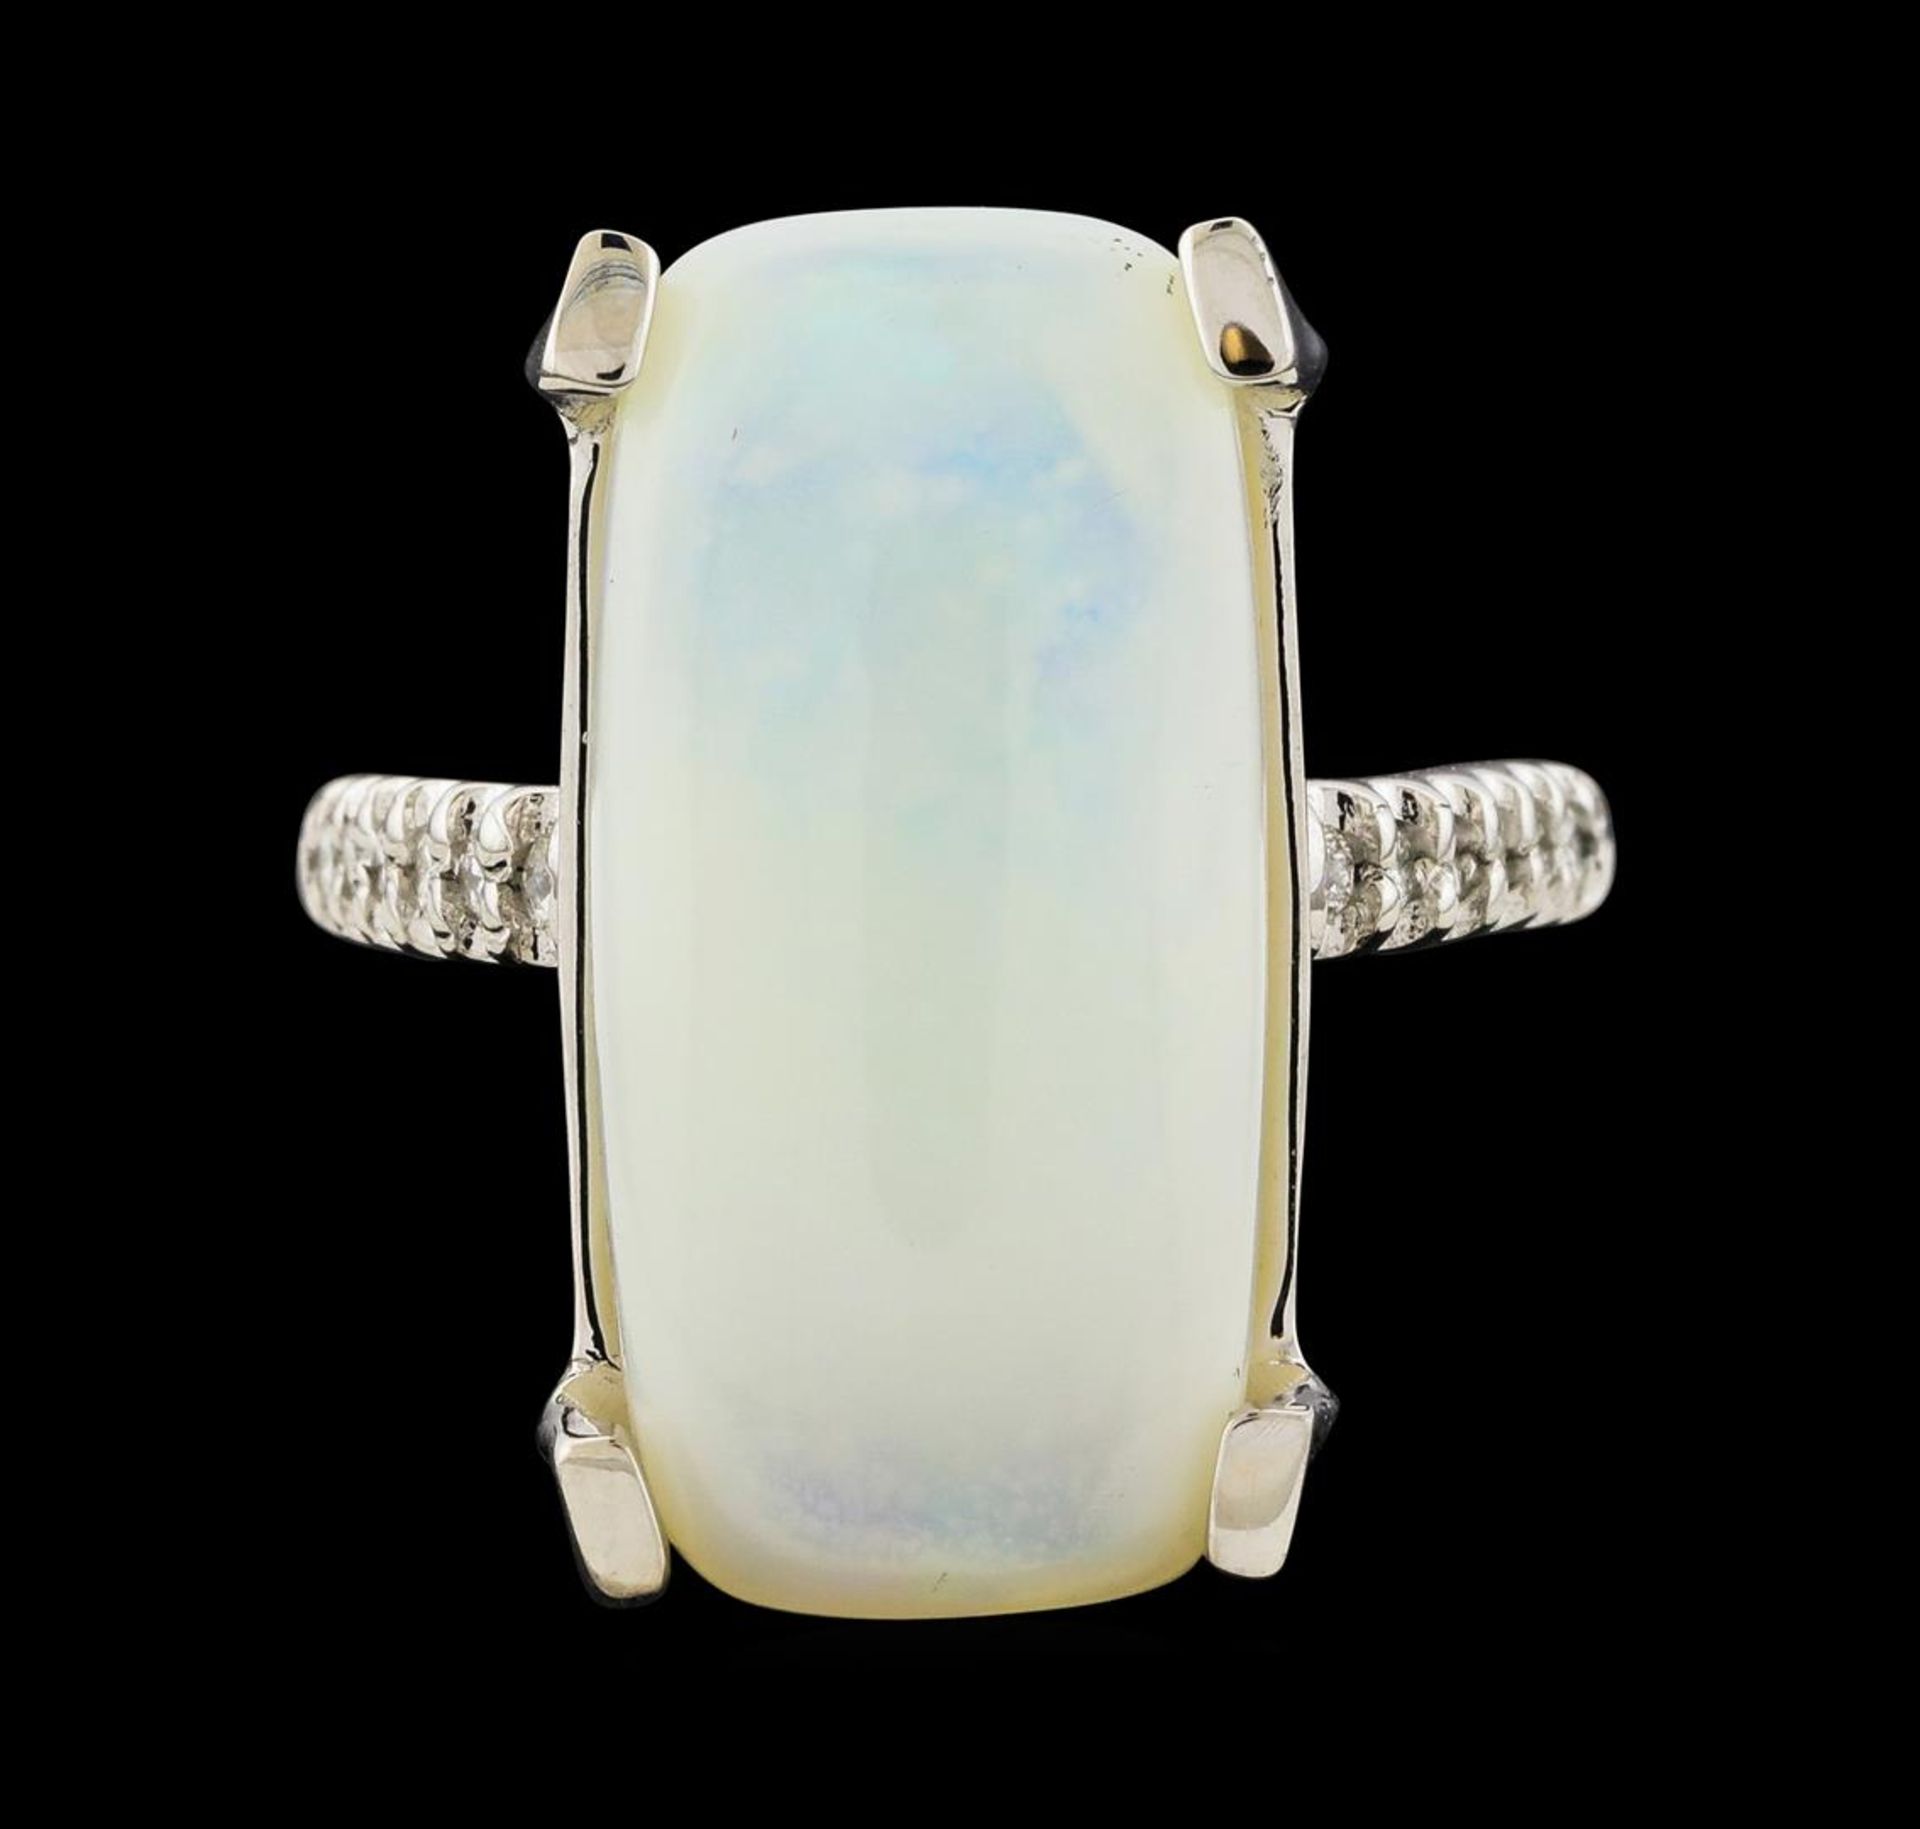 7.50 ctw Opal and Diamond Ring - 14KT White Gold - Image 2 of 4